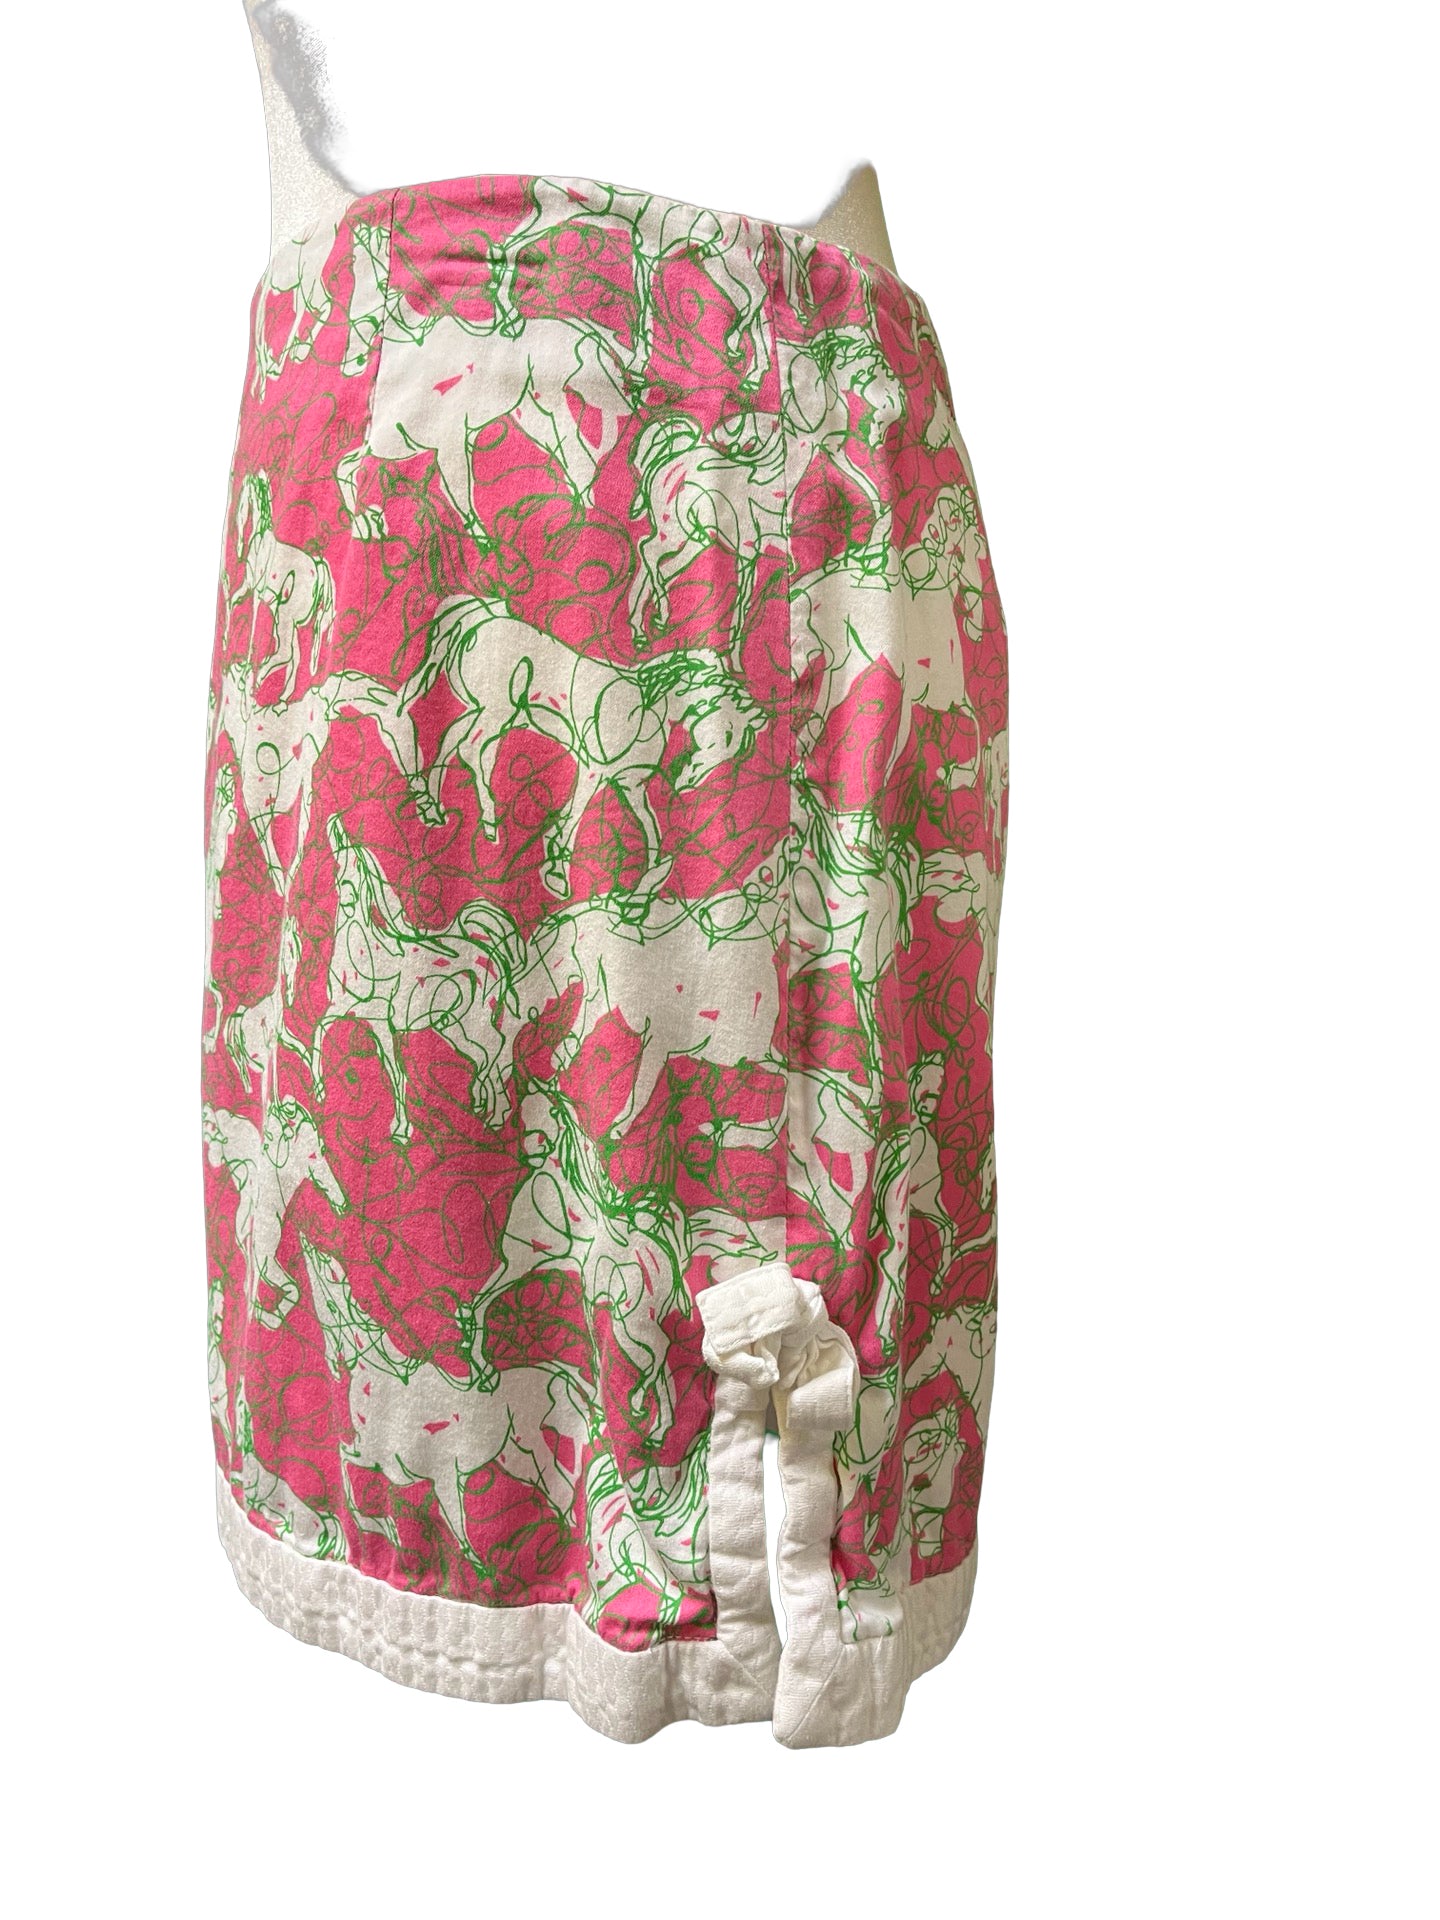 Size 4 Lily Pulitzer Skirt